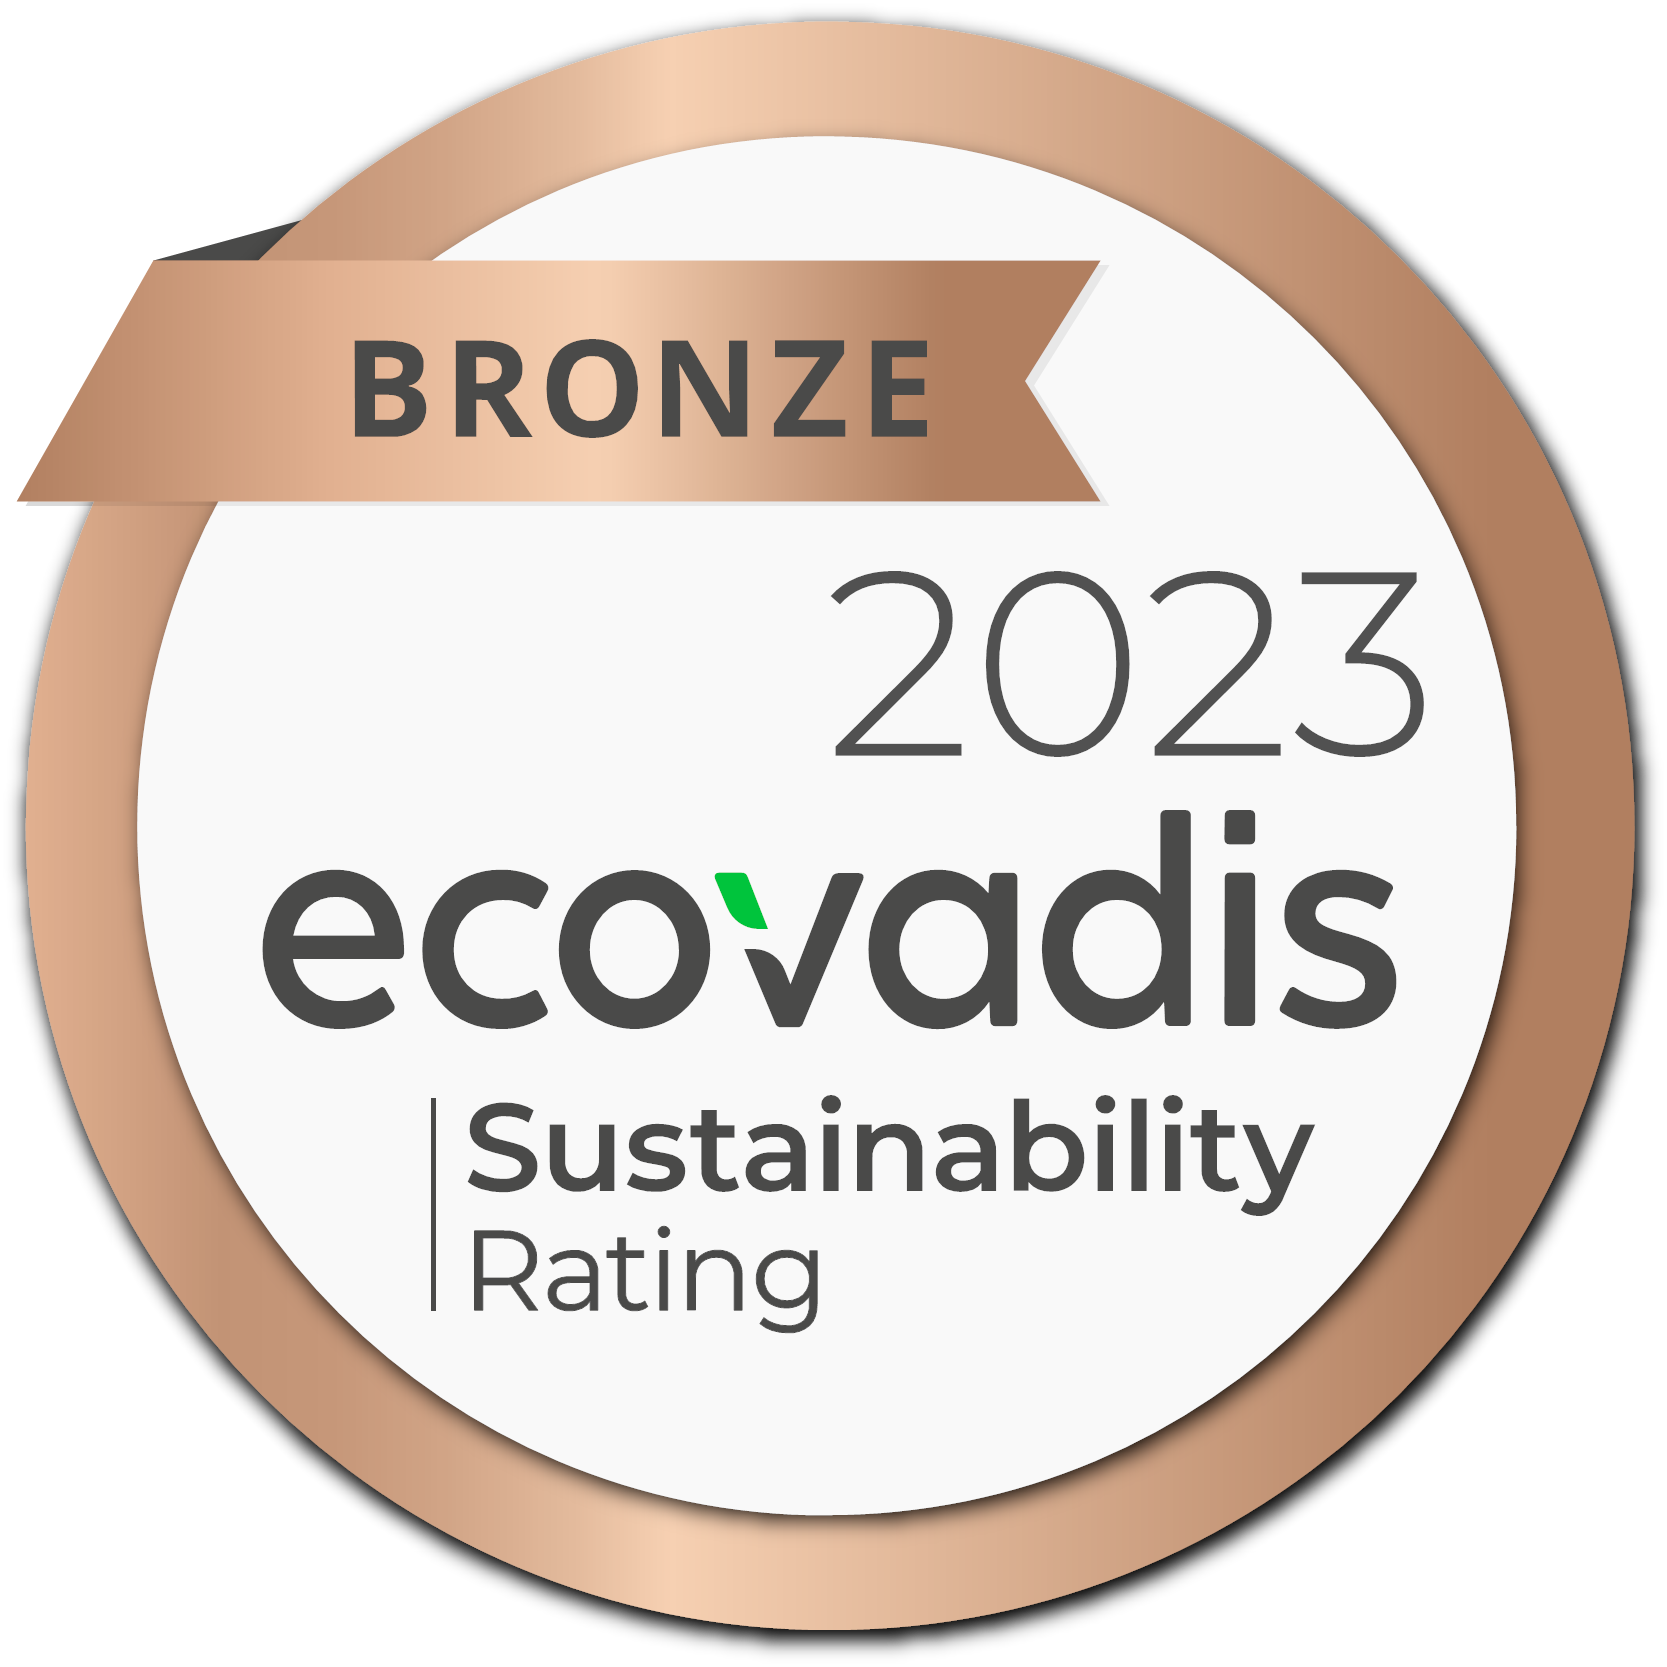 Rated “Bronze” in EcoVadis Sustainability Assessment